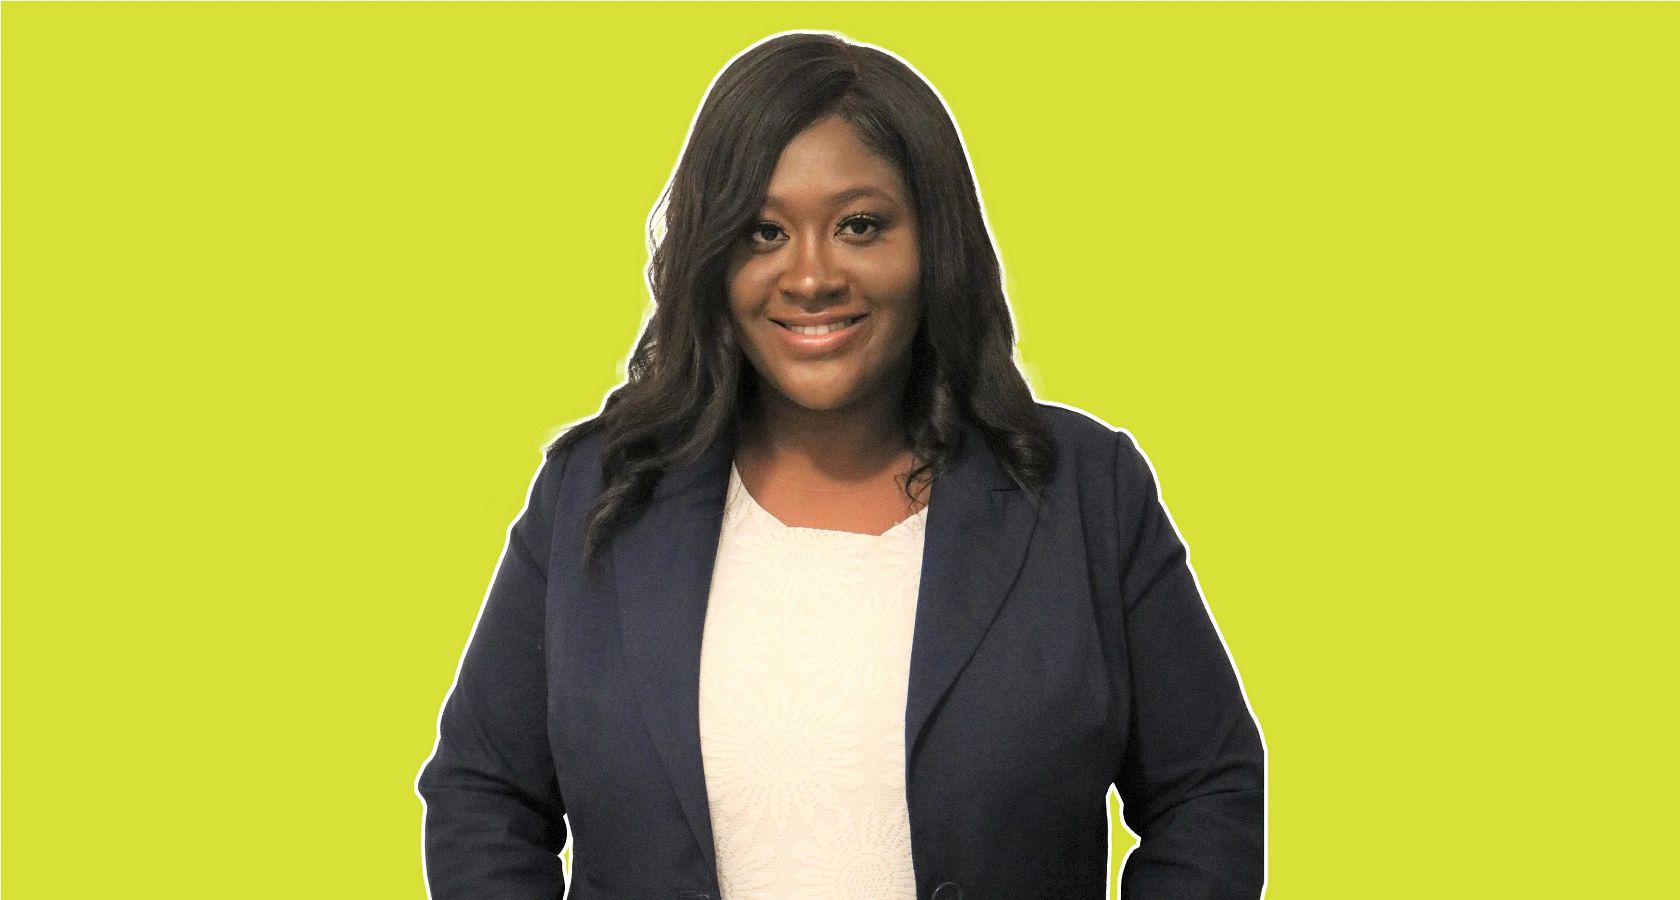 Latoya Leads Career in Law After Coming to Centennial Image